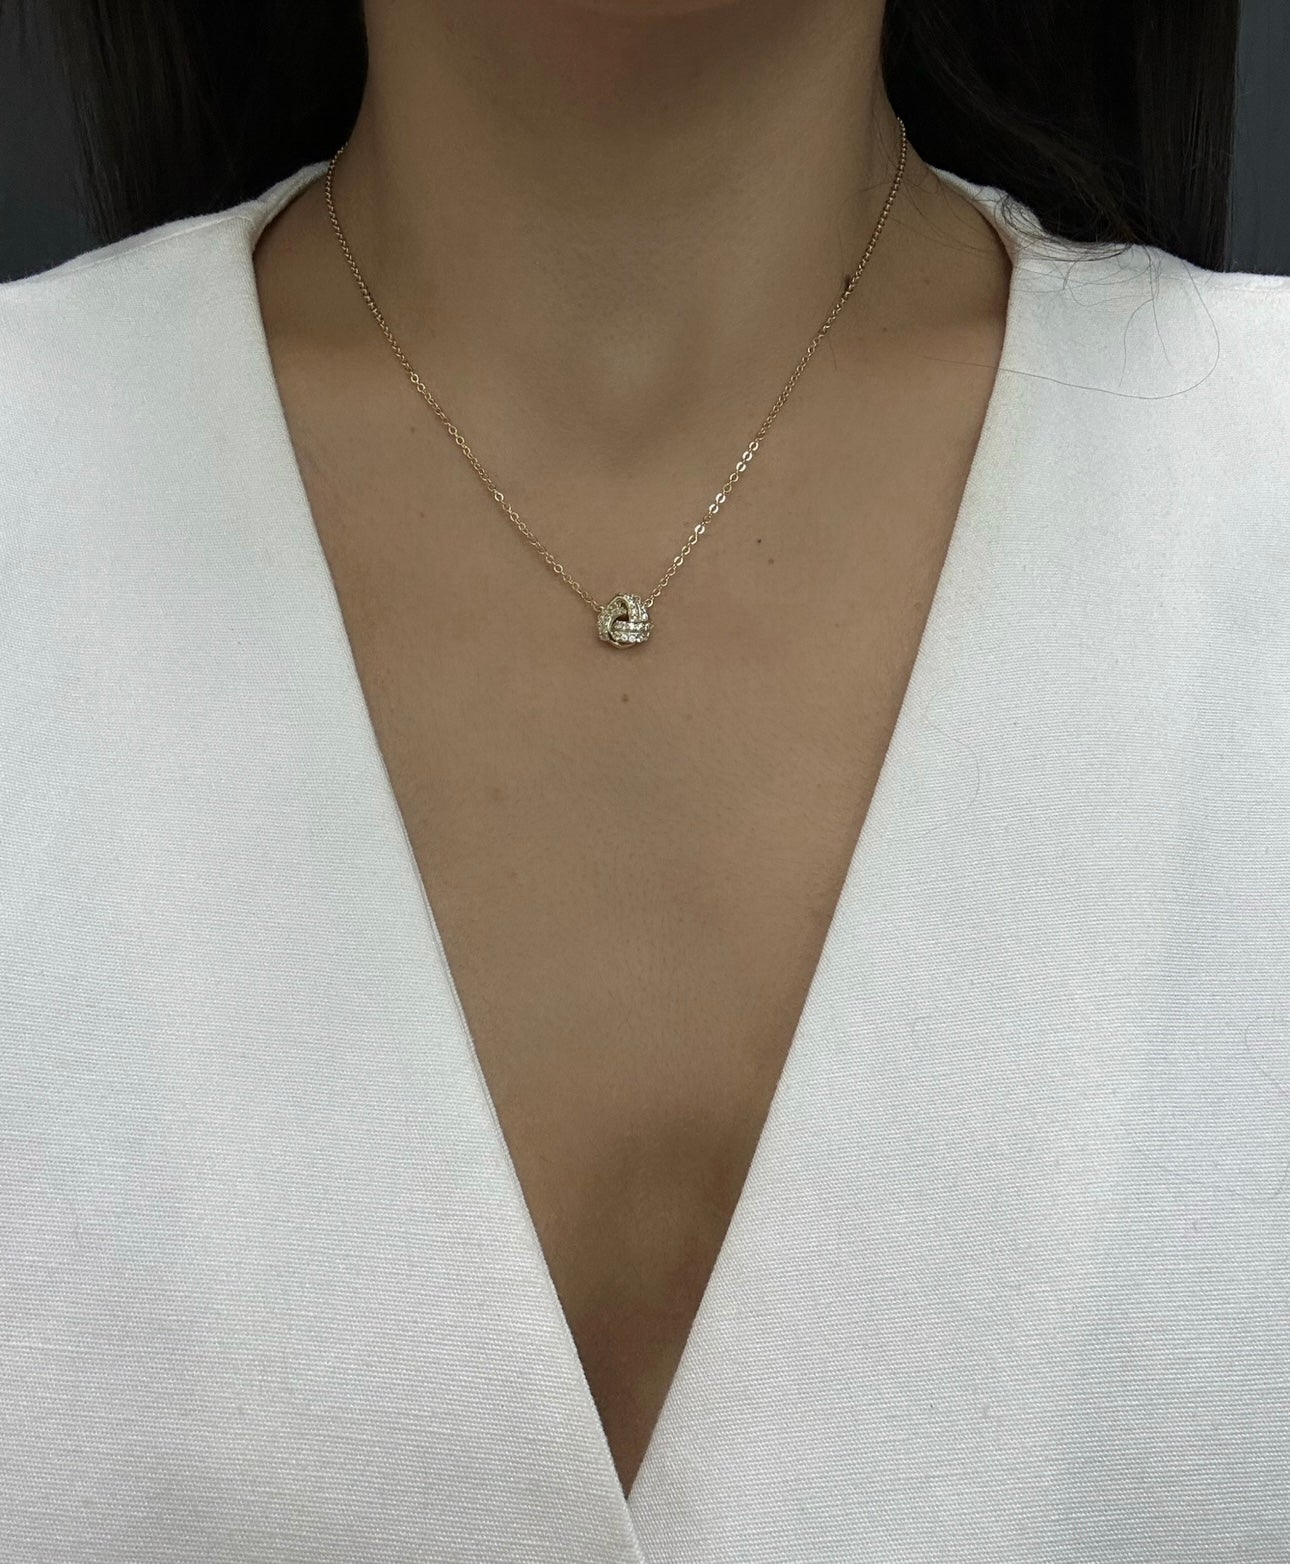 ROUND KNOT NECKLACE WITH DIAMONDS